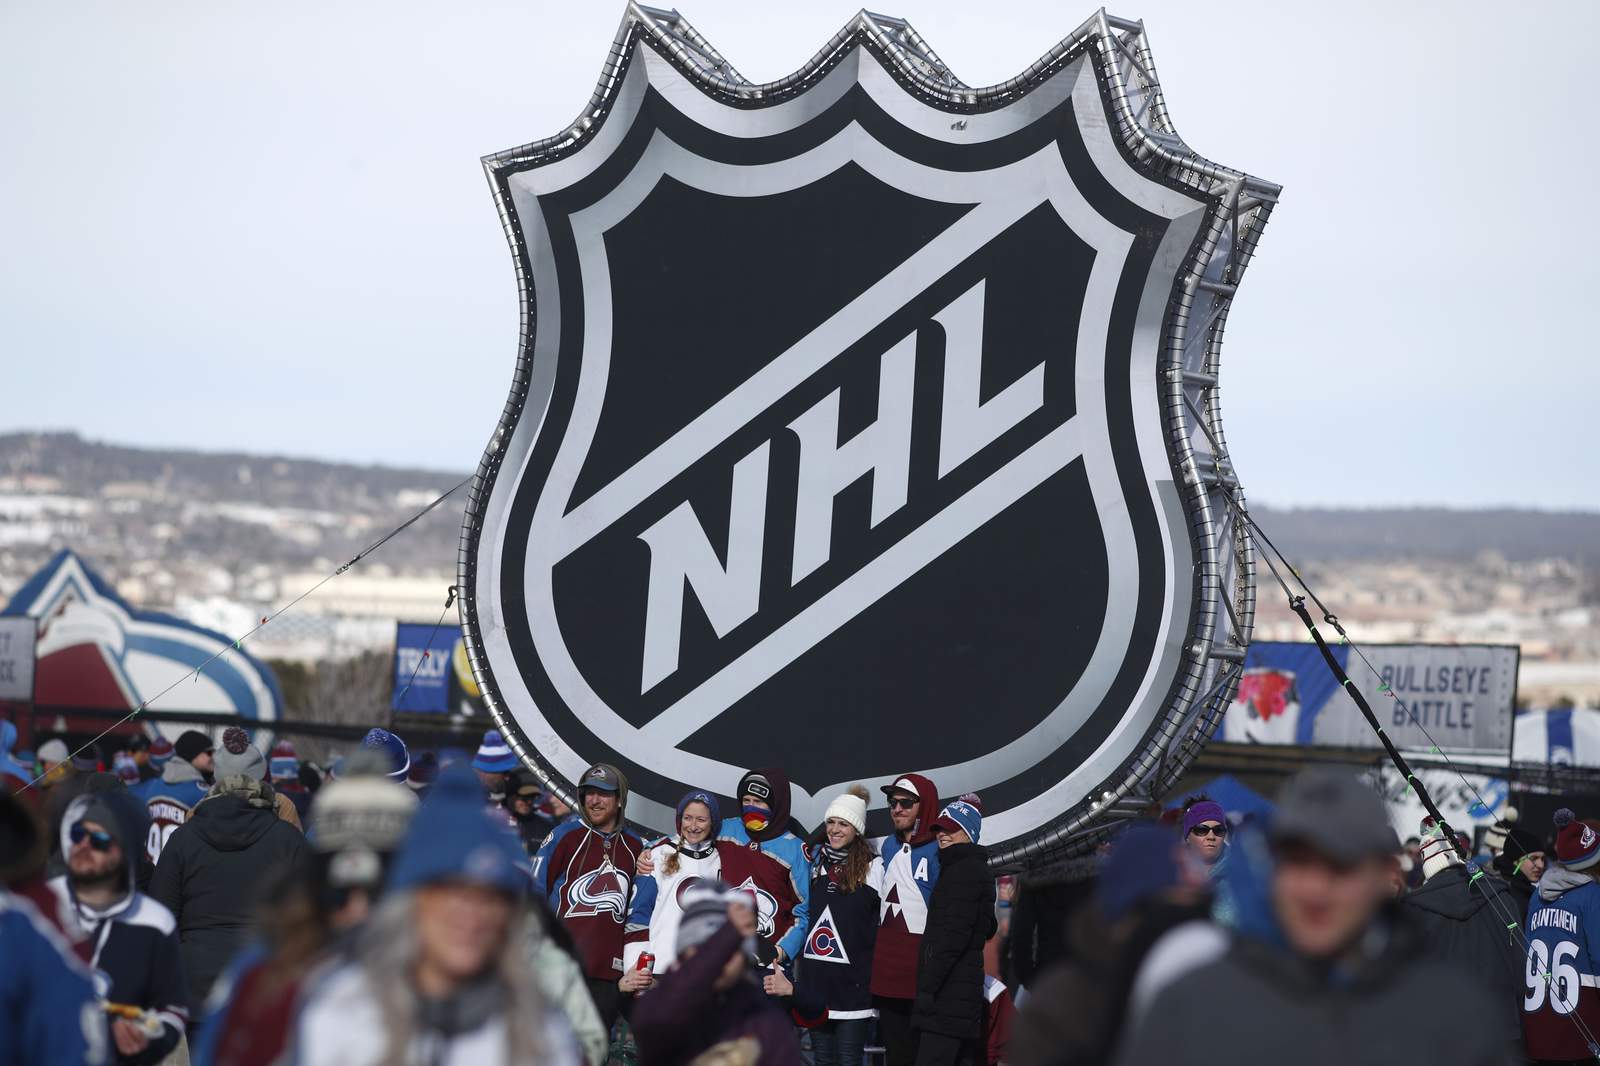 NHLPA approves going forward with 24-team playoff talks